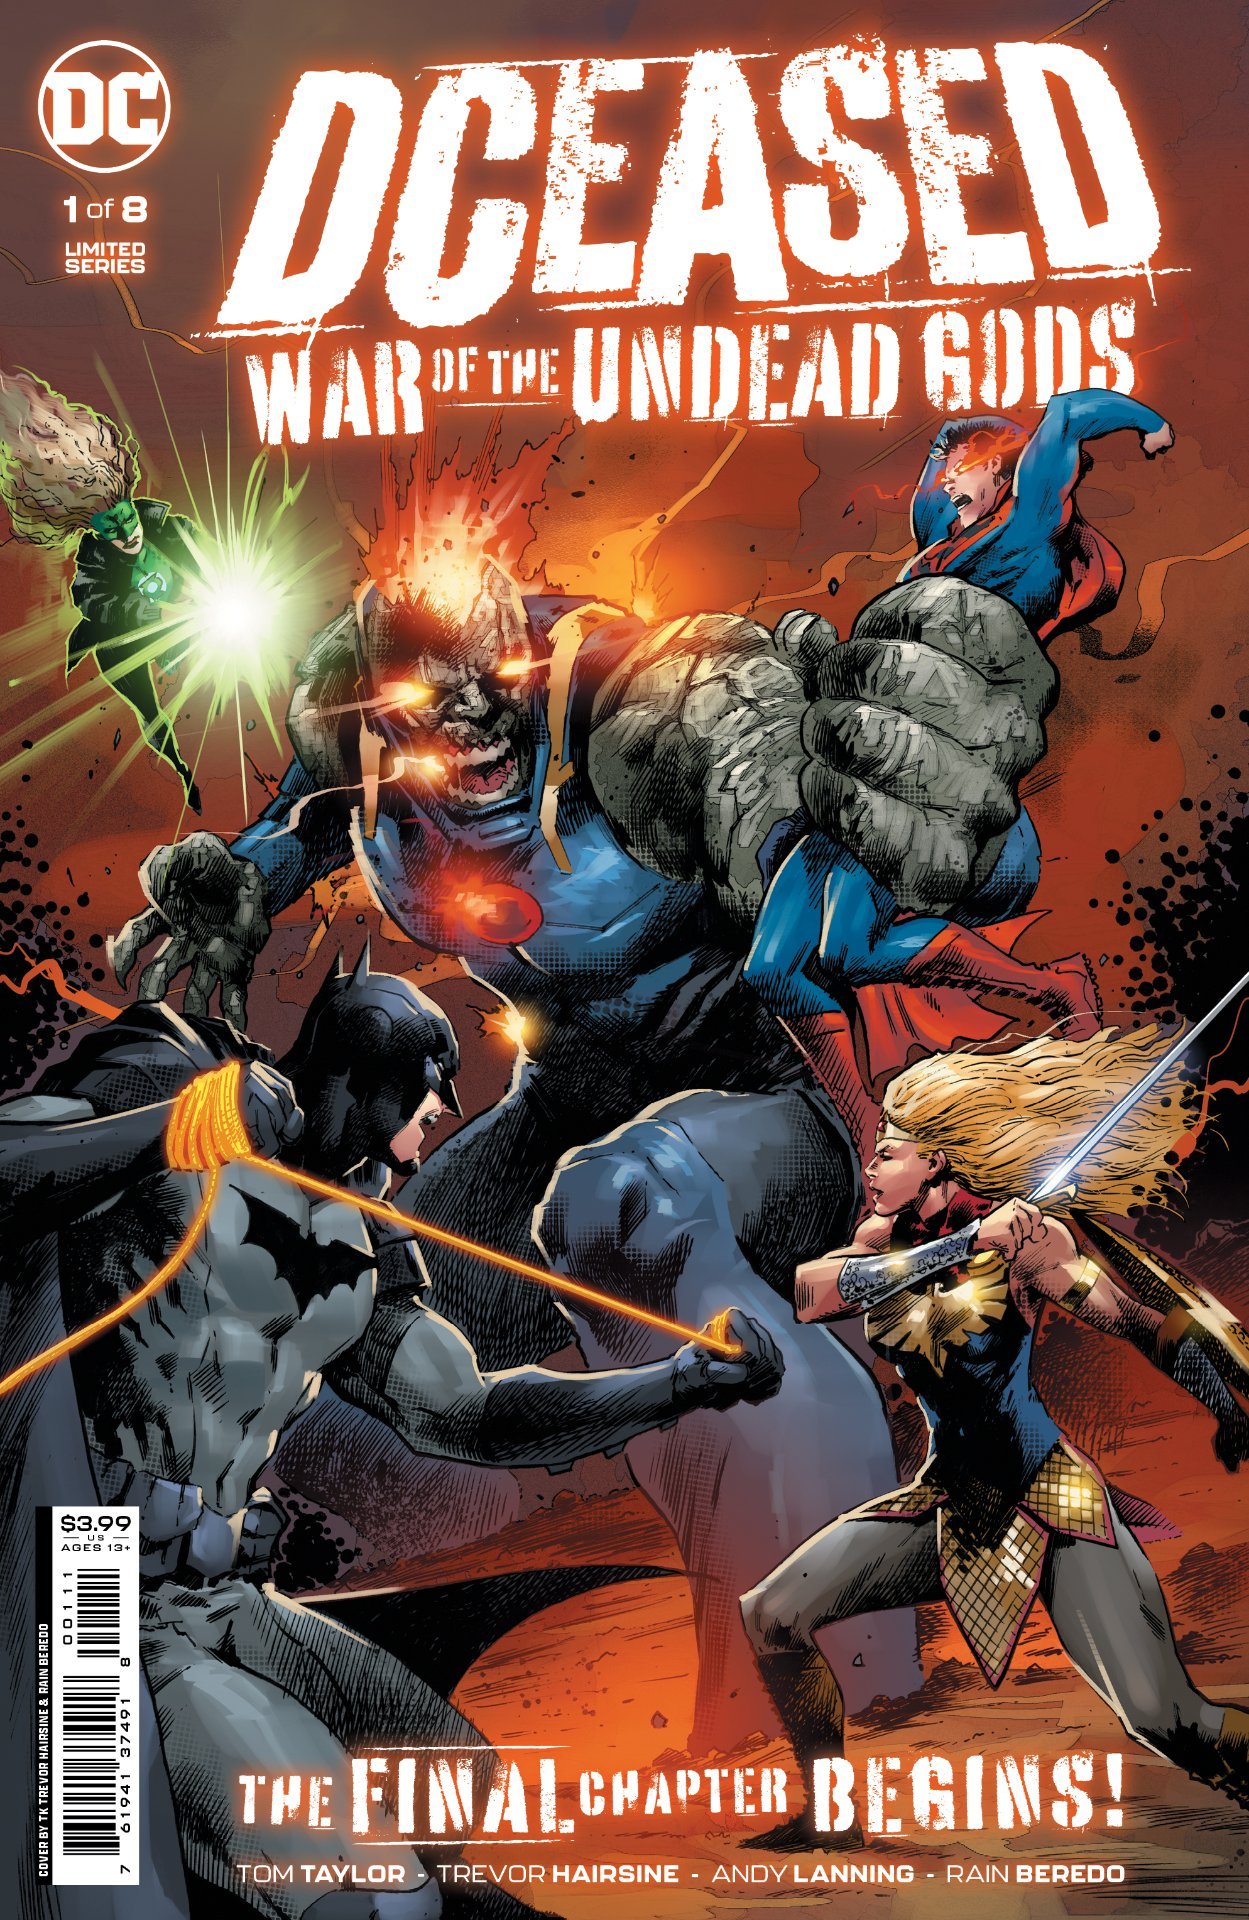 Cover di DCeased: War of the Undead Gods 1 di Trevor Hairshine